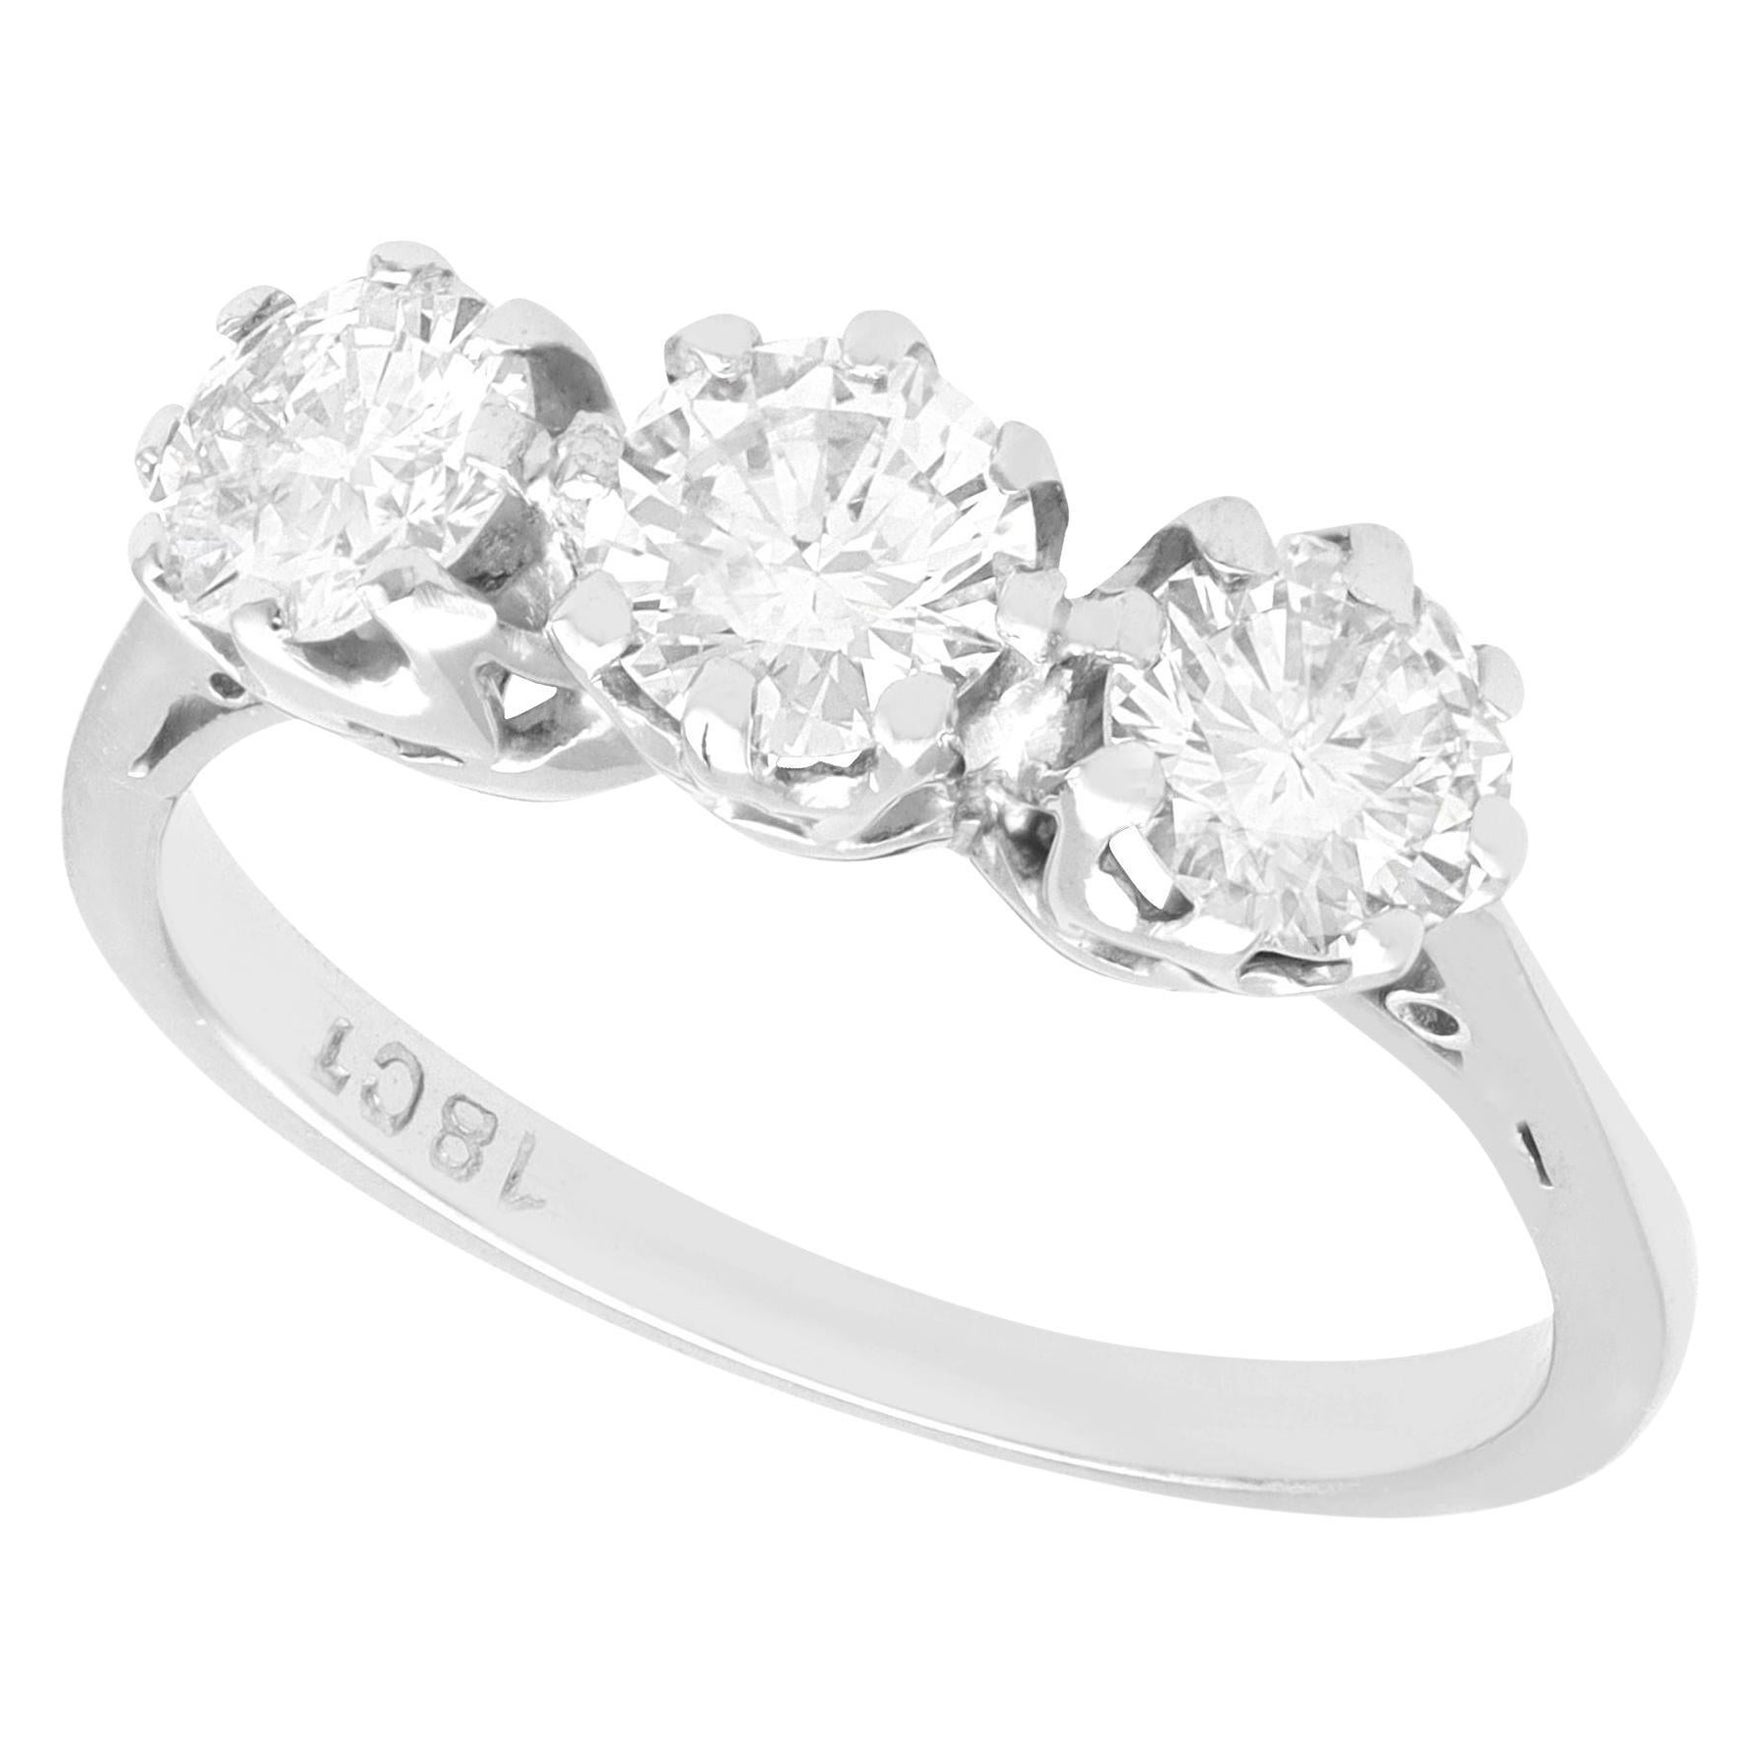 Vintage 1.23 Carat Diamond and 18k White Gold Trilogy Ring For Sale